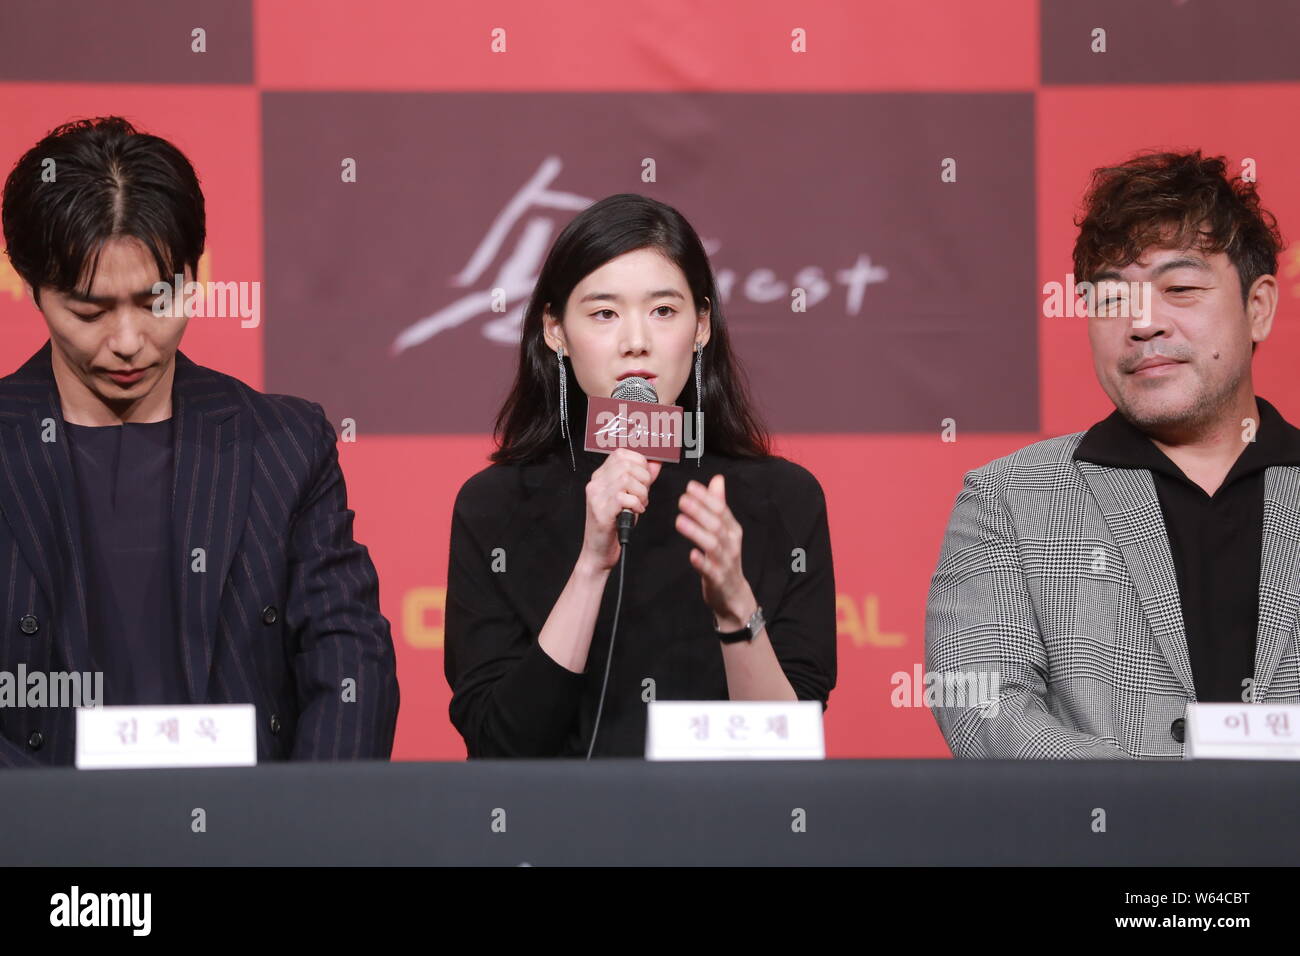 (From left) South Korean model and actor Kim Jae-wook, actress Jung Eun-chae, and actor Lee Won-jong, attend a press conference for new TV series 'The Stock Photo